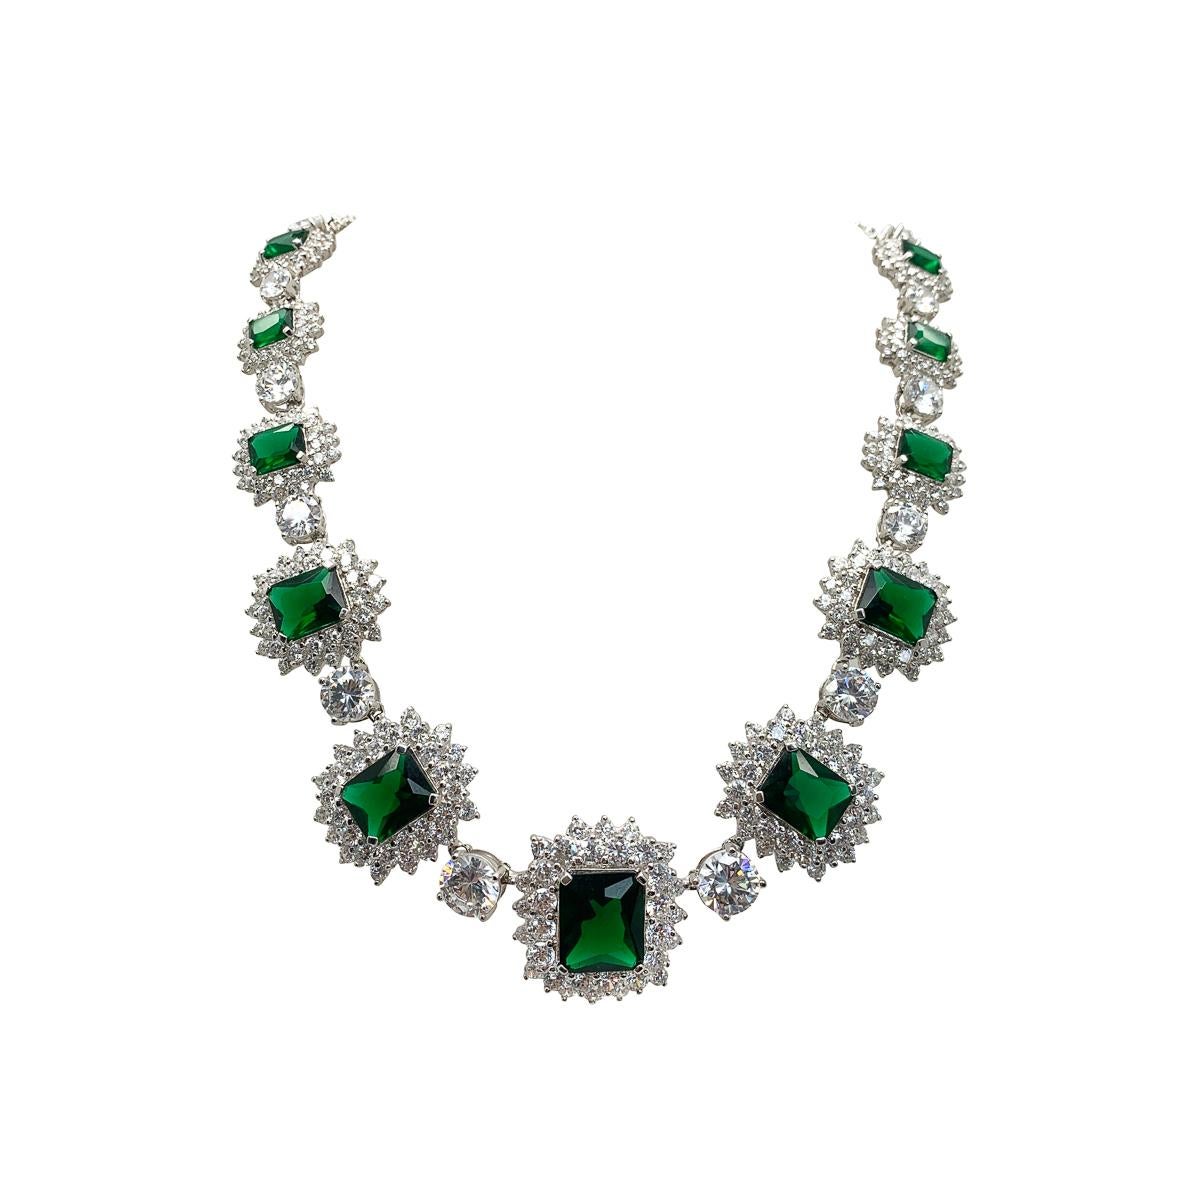 A breath-taking suite comprising a vintage emerald crystal necklace, bracelet and ring. Crafted in solid sterling silver with each stone claw set.
Featuring large emerald crystals surrounded by galleries of white. Creating of course a feel of